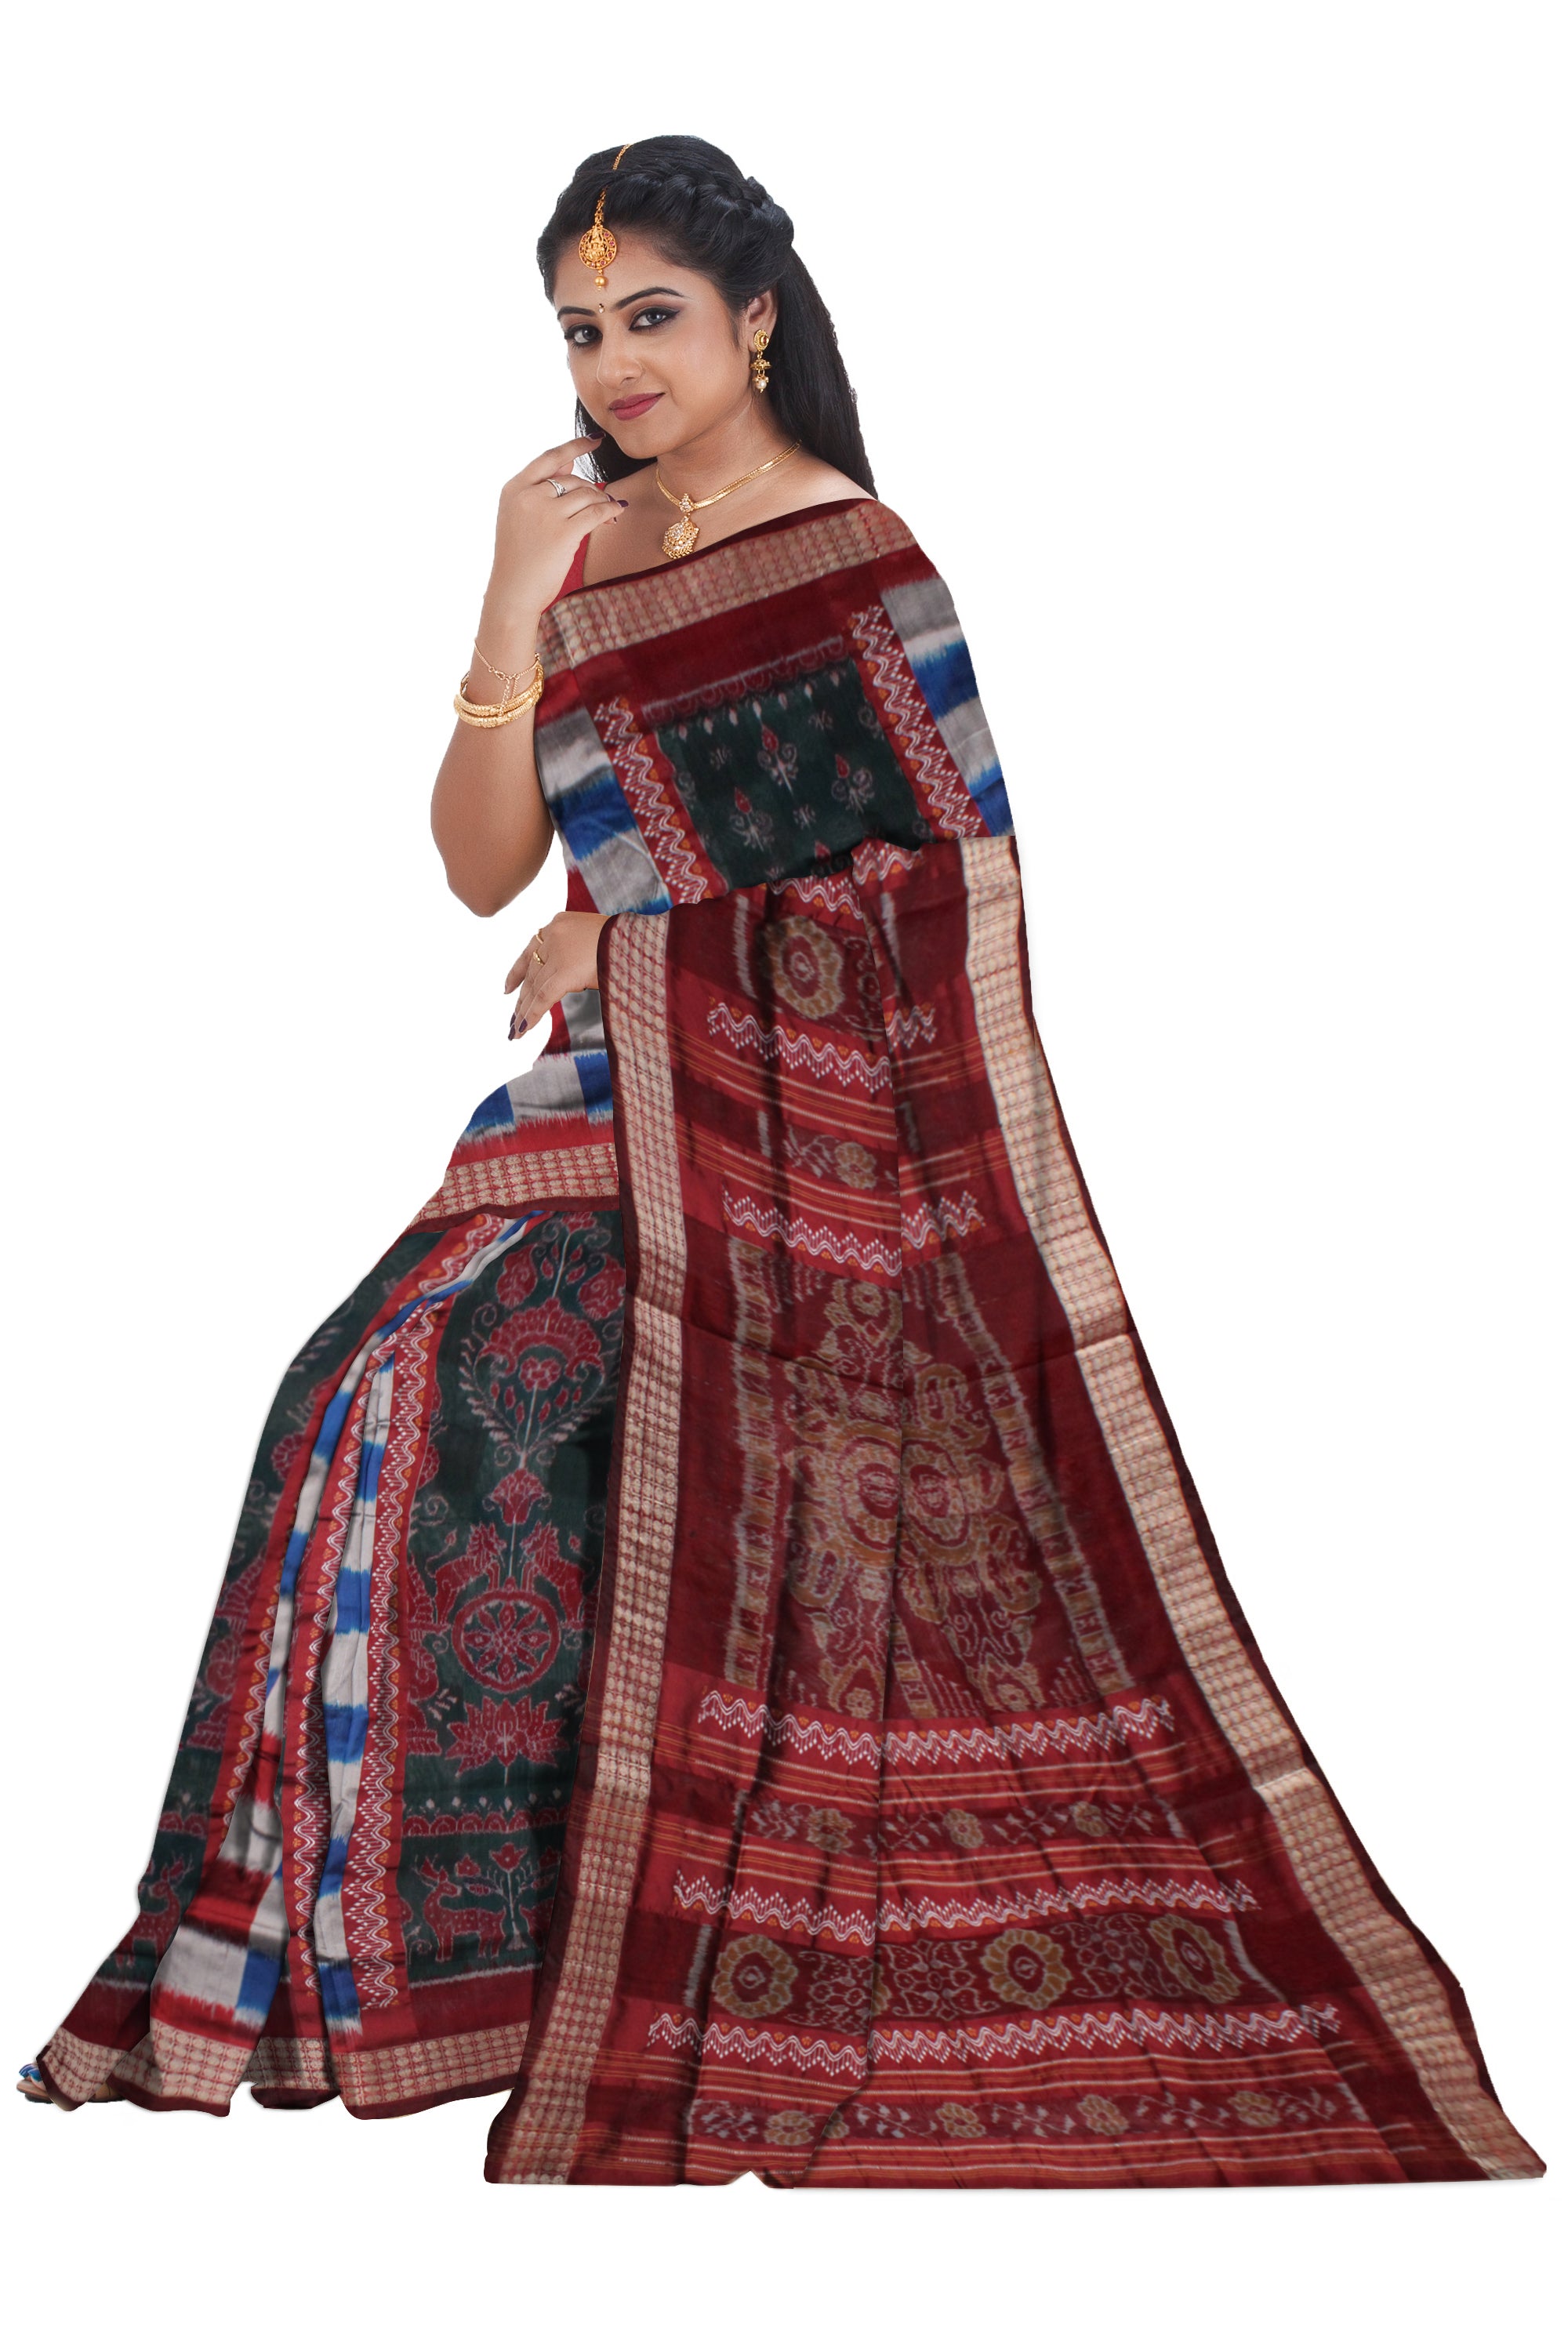 PASAPALI WITH BANDHA PATTERN BOMKEI PATA SAREE IS SKY BLUE AND MAROON COLOR BASE,WITH BLOUSE PIECE. - Koshali Arts & Crafts Enterprise